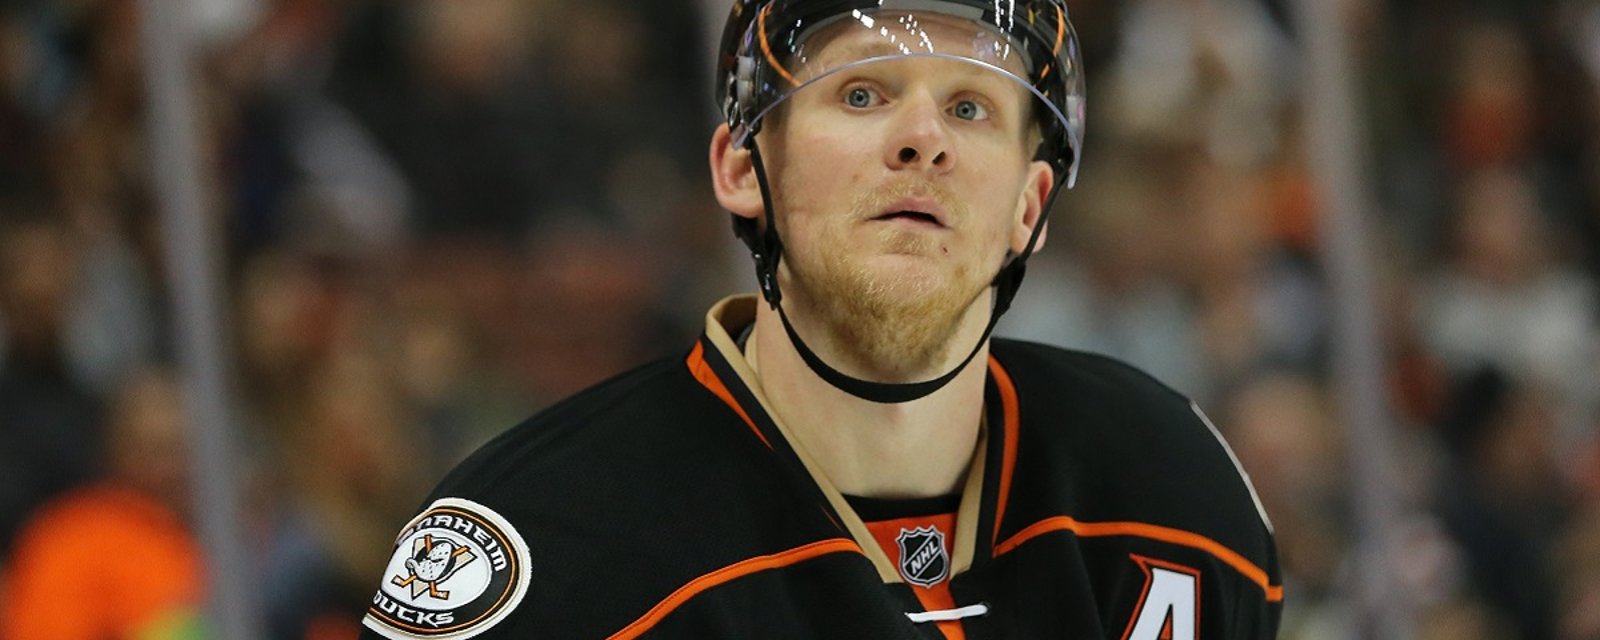 Breaking: Huge update on the Corey Perry trade rumors and more.